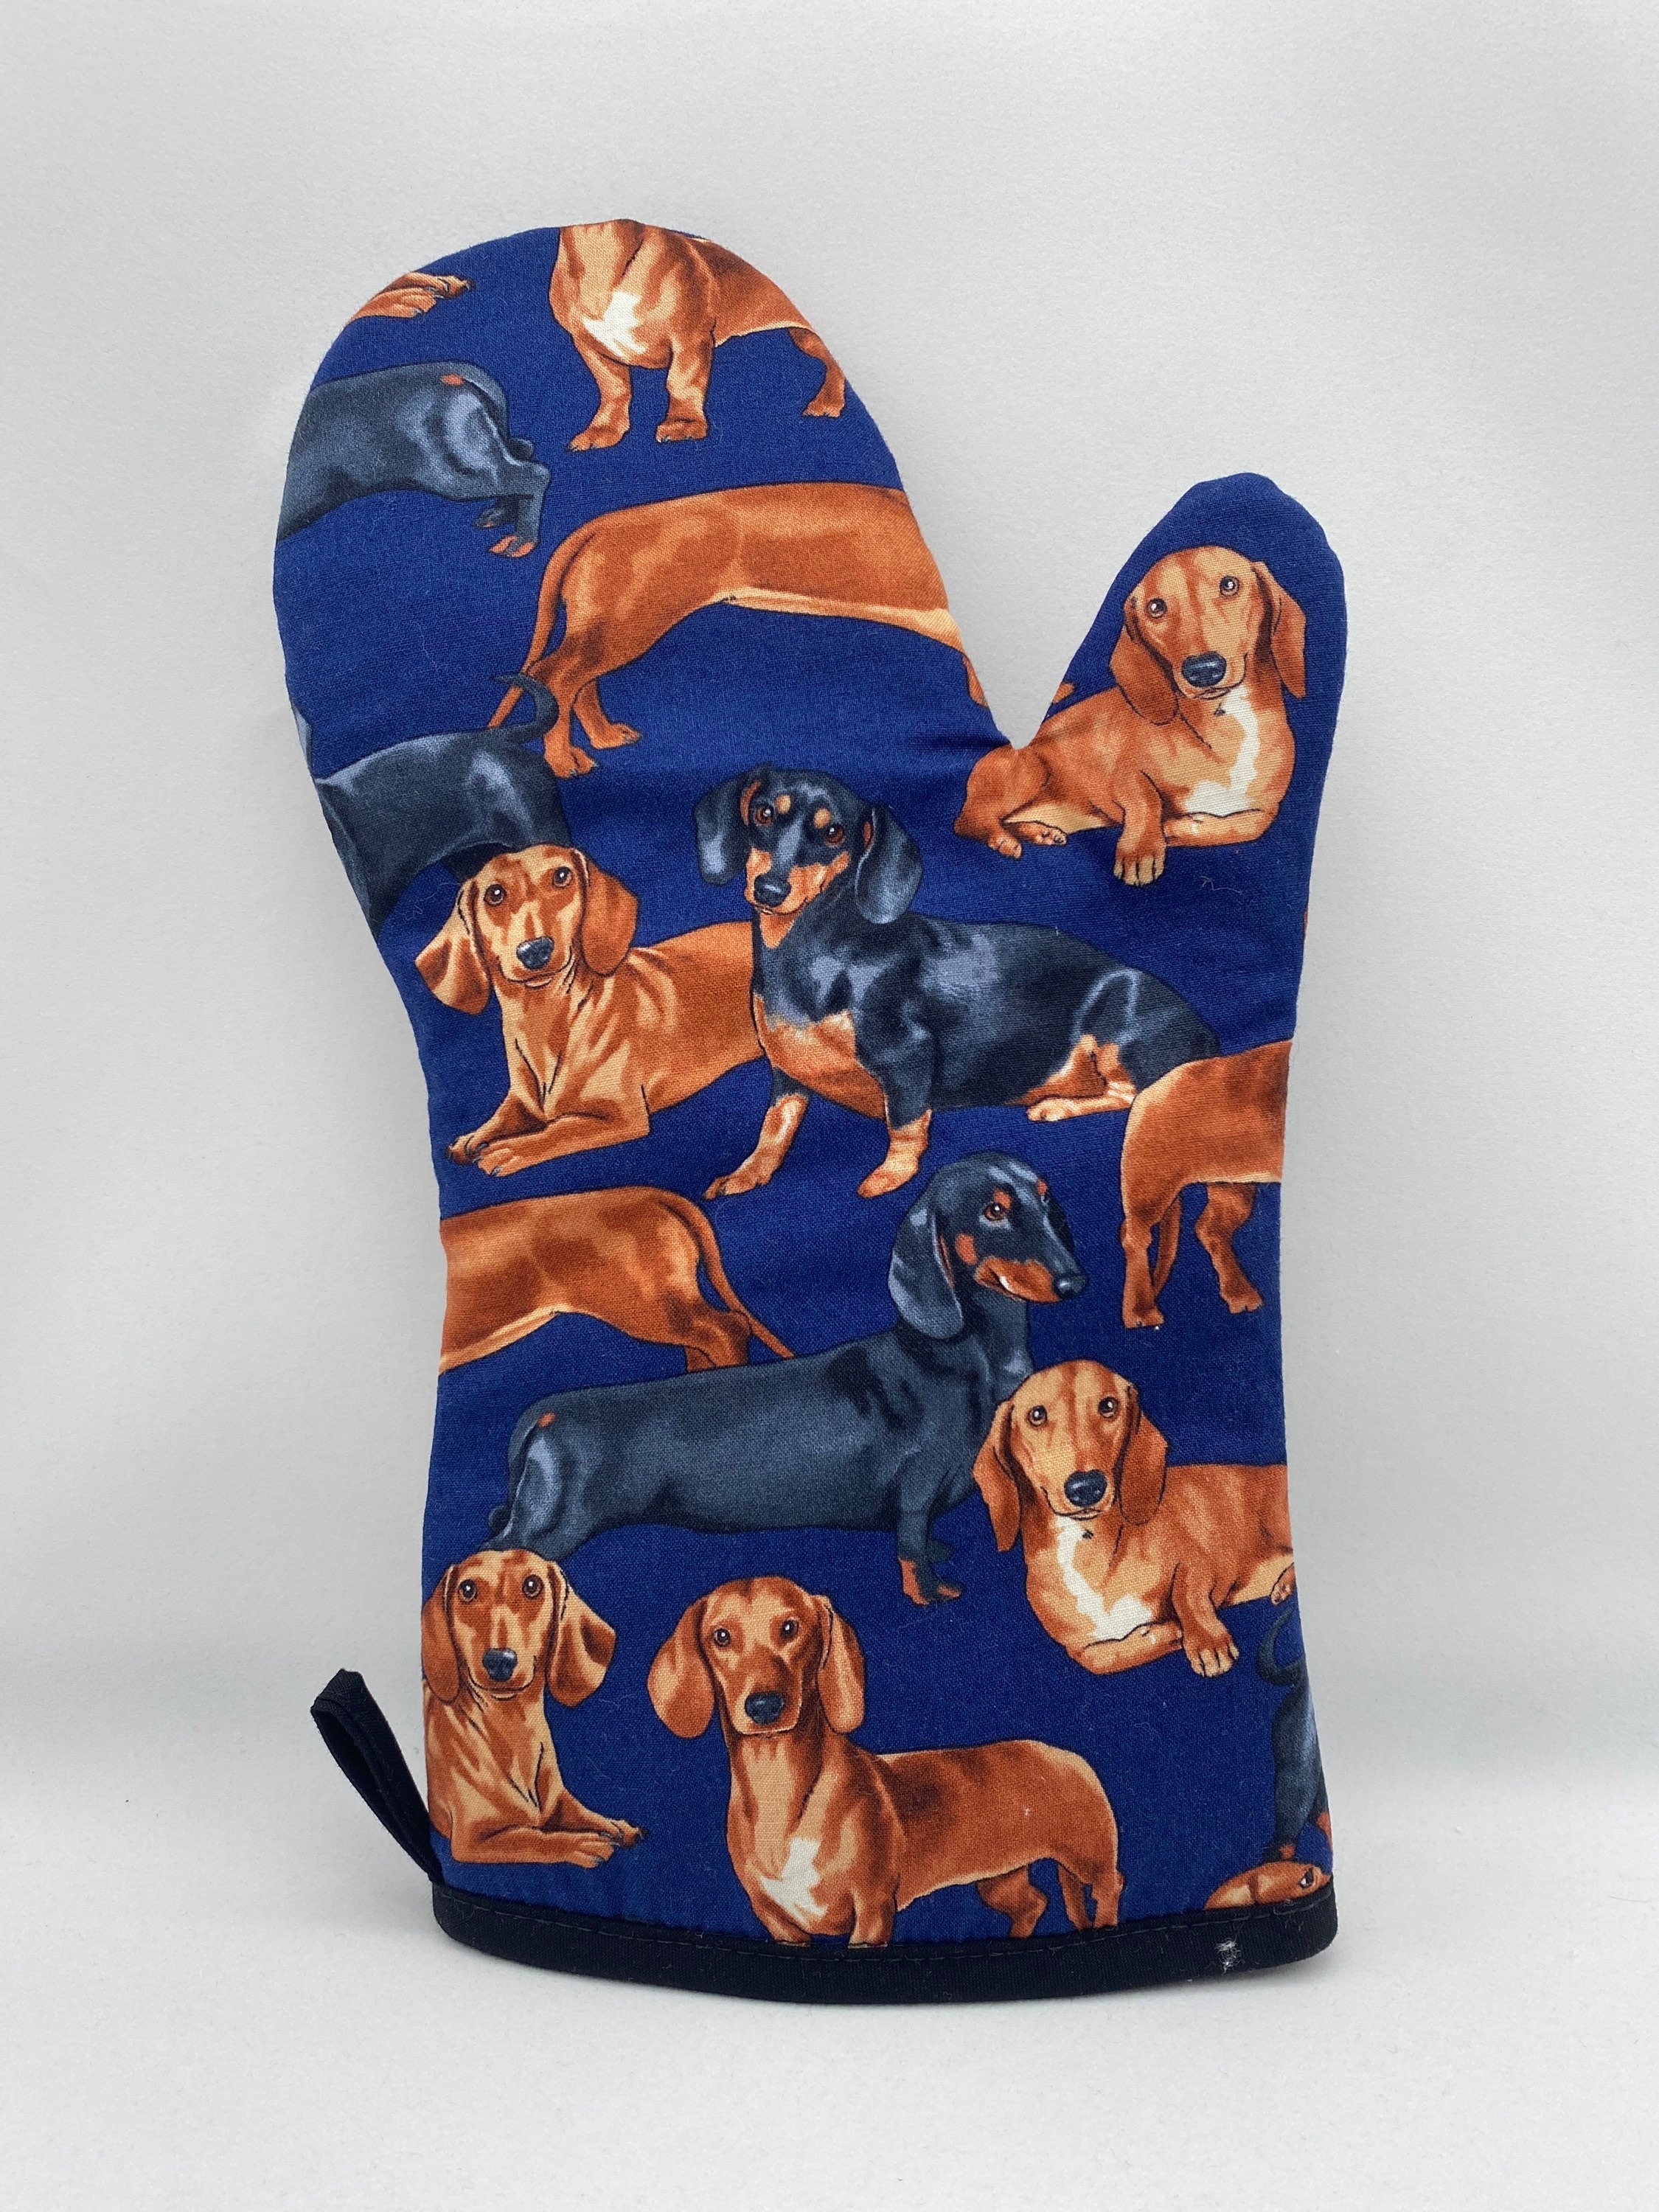  Wiener Dog Fabric Doxie Dachshund Weiner Dog Pet Dogs Oven  Mitts and Potholders (2-Piece Sets) - Kitchen Set with Cotton Heat  Resistant,Oven Gloves for BBQ Cooking Baking Grilling : Home 